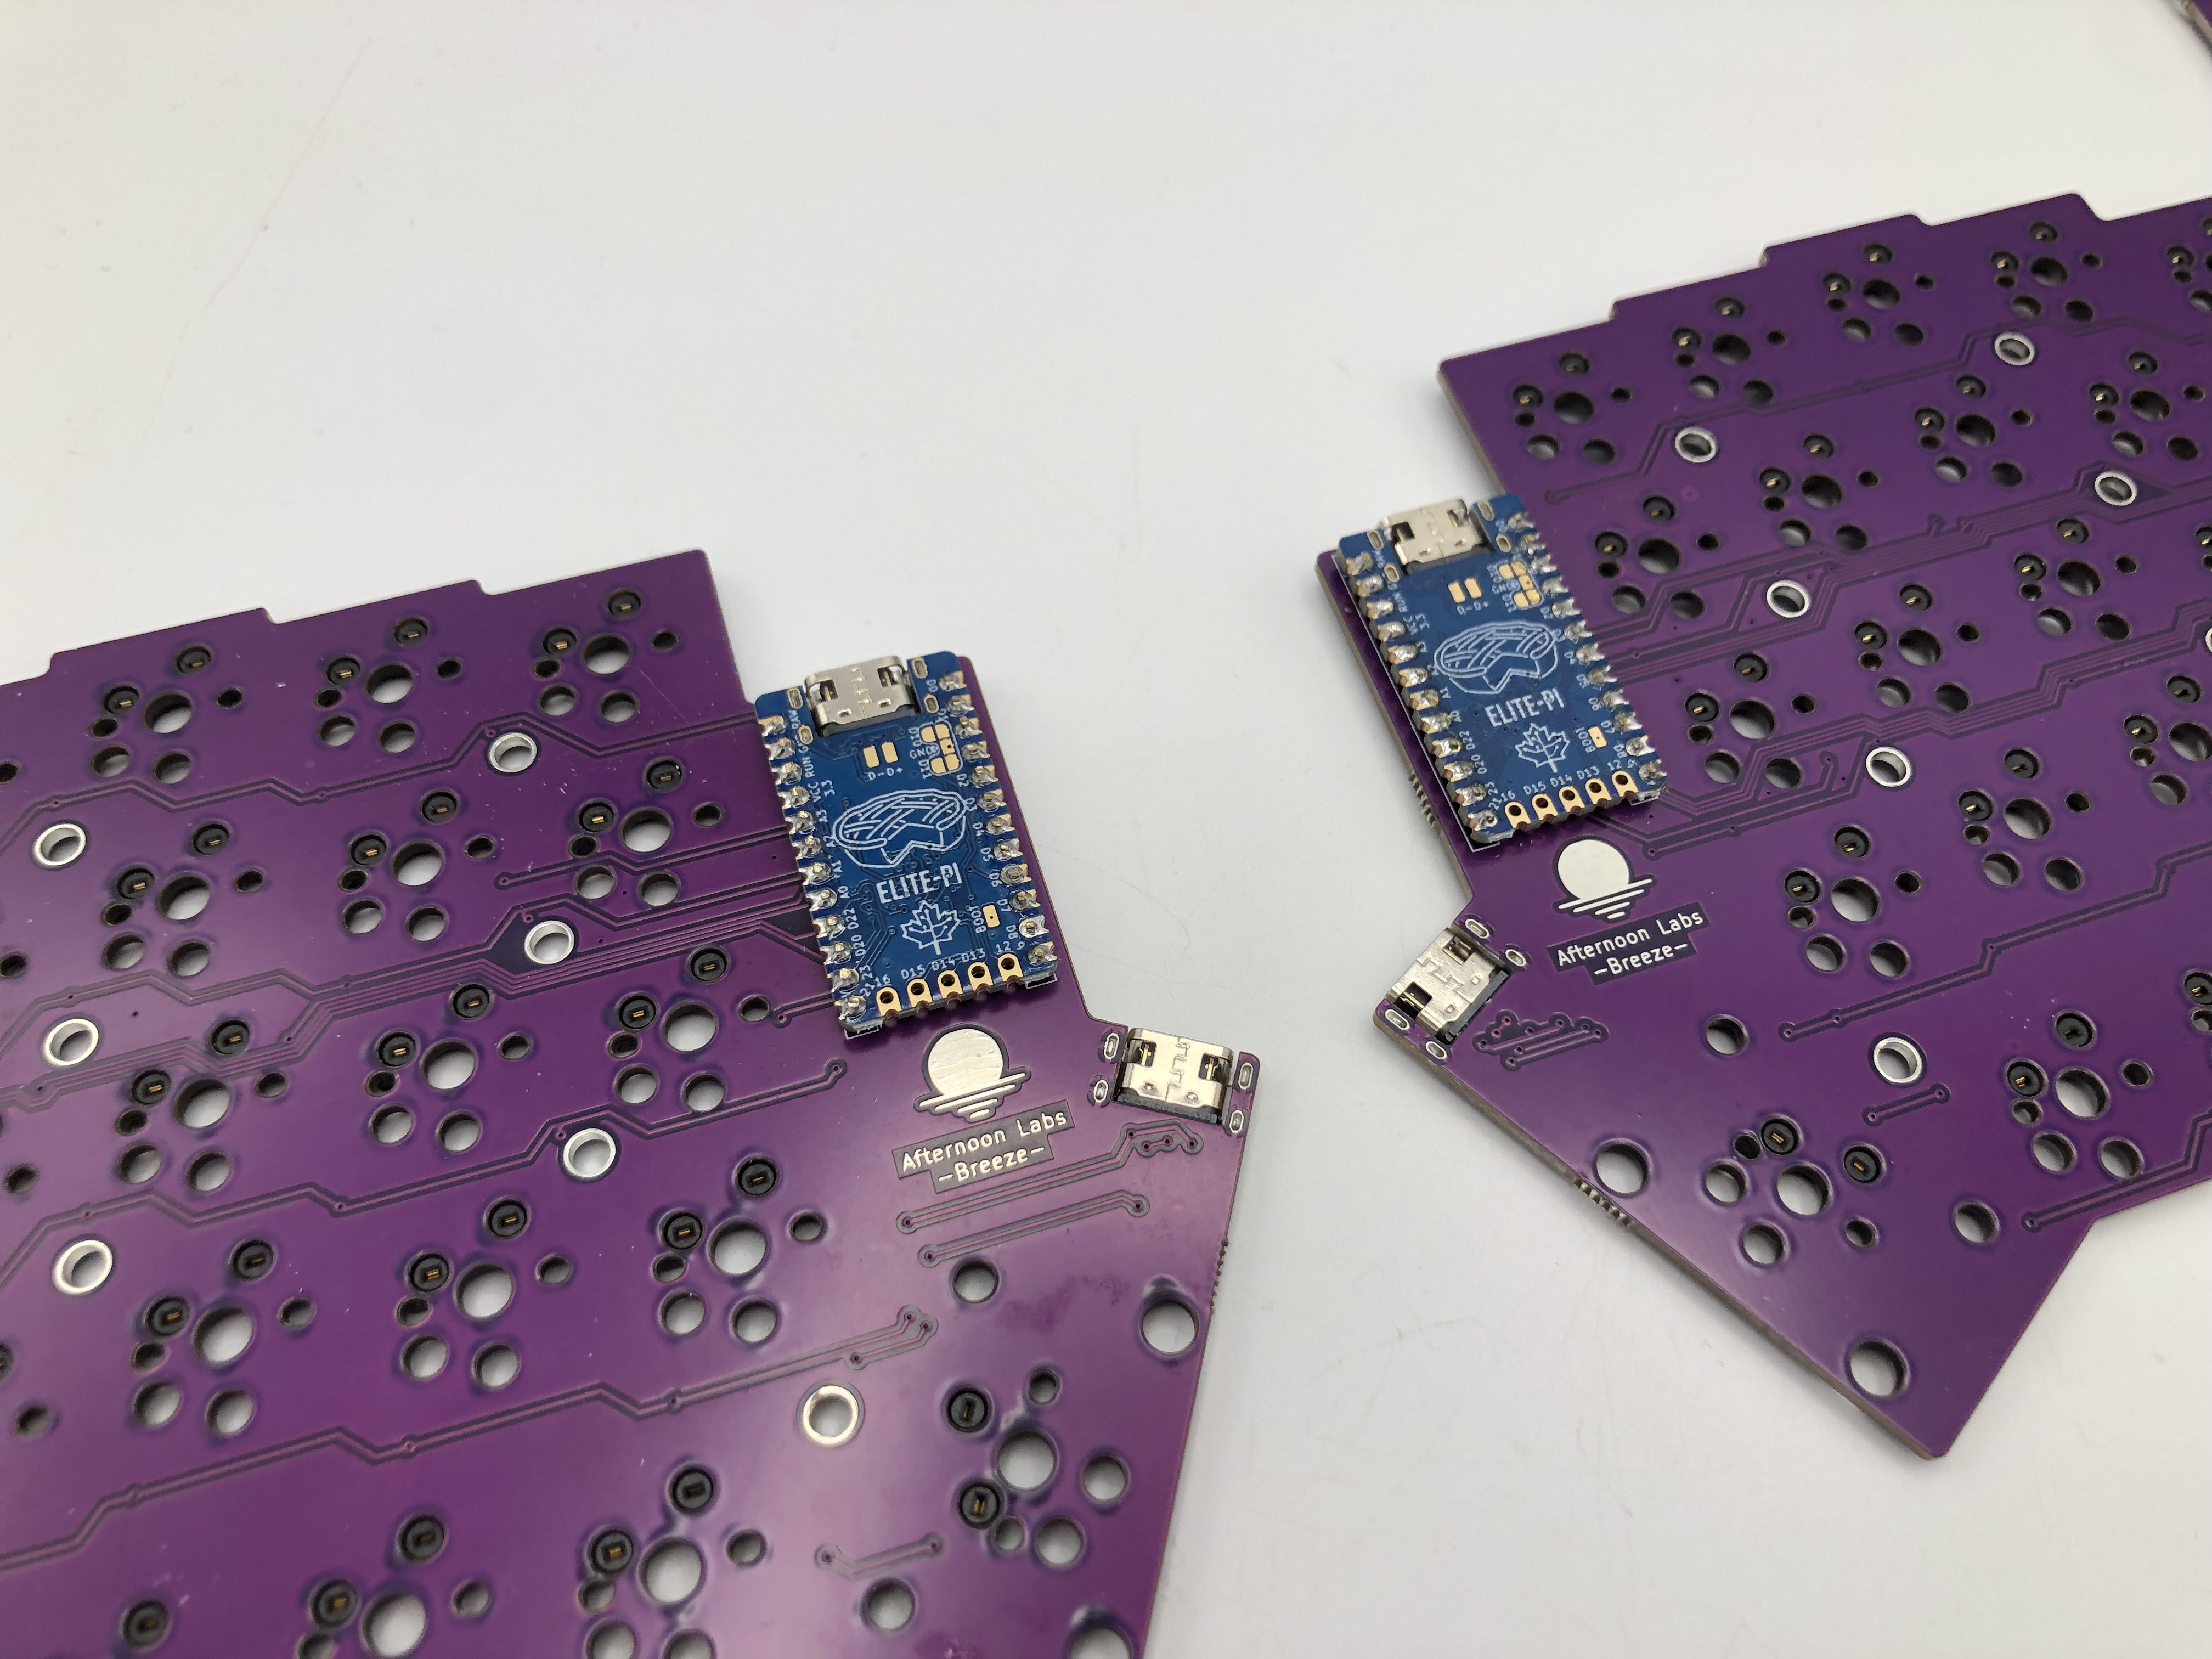 Solder controllers